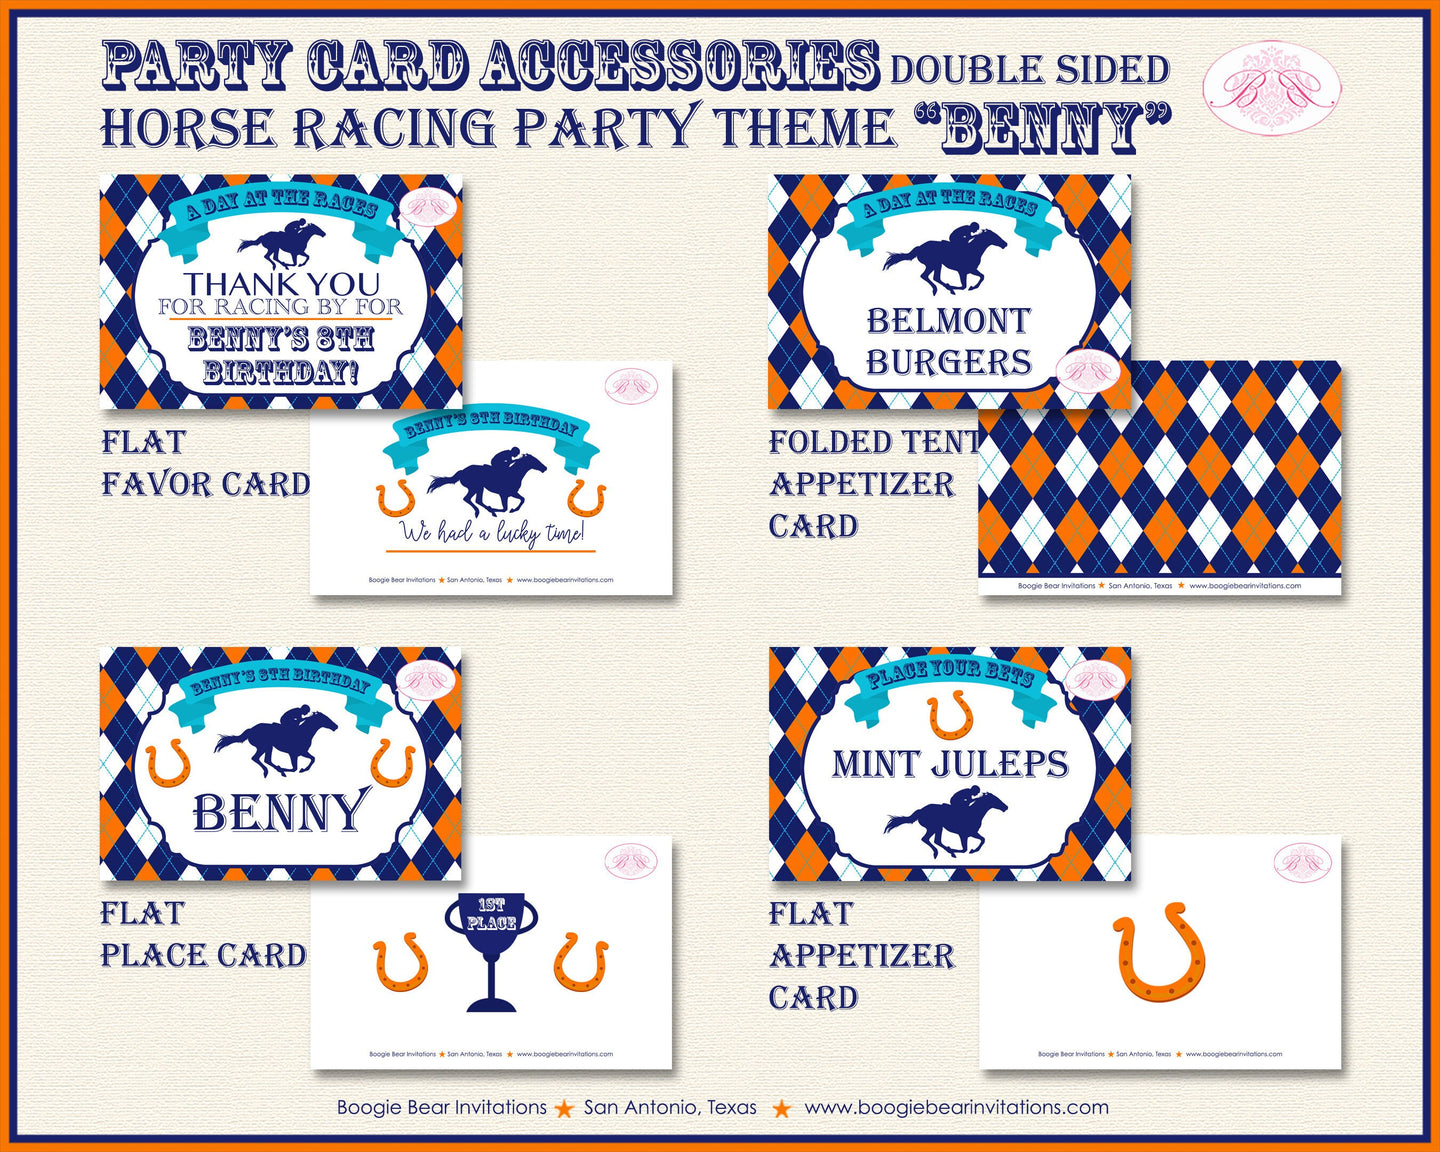 Horse Racing Birthday Party Favor Card Tent Appetizer Place Sign Orange Blue Kentucky Derby Jockey Track Boogie Bear Invitations Benny Theme